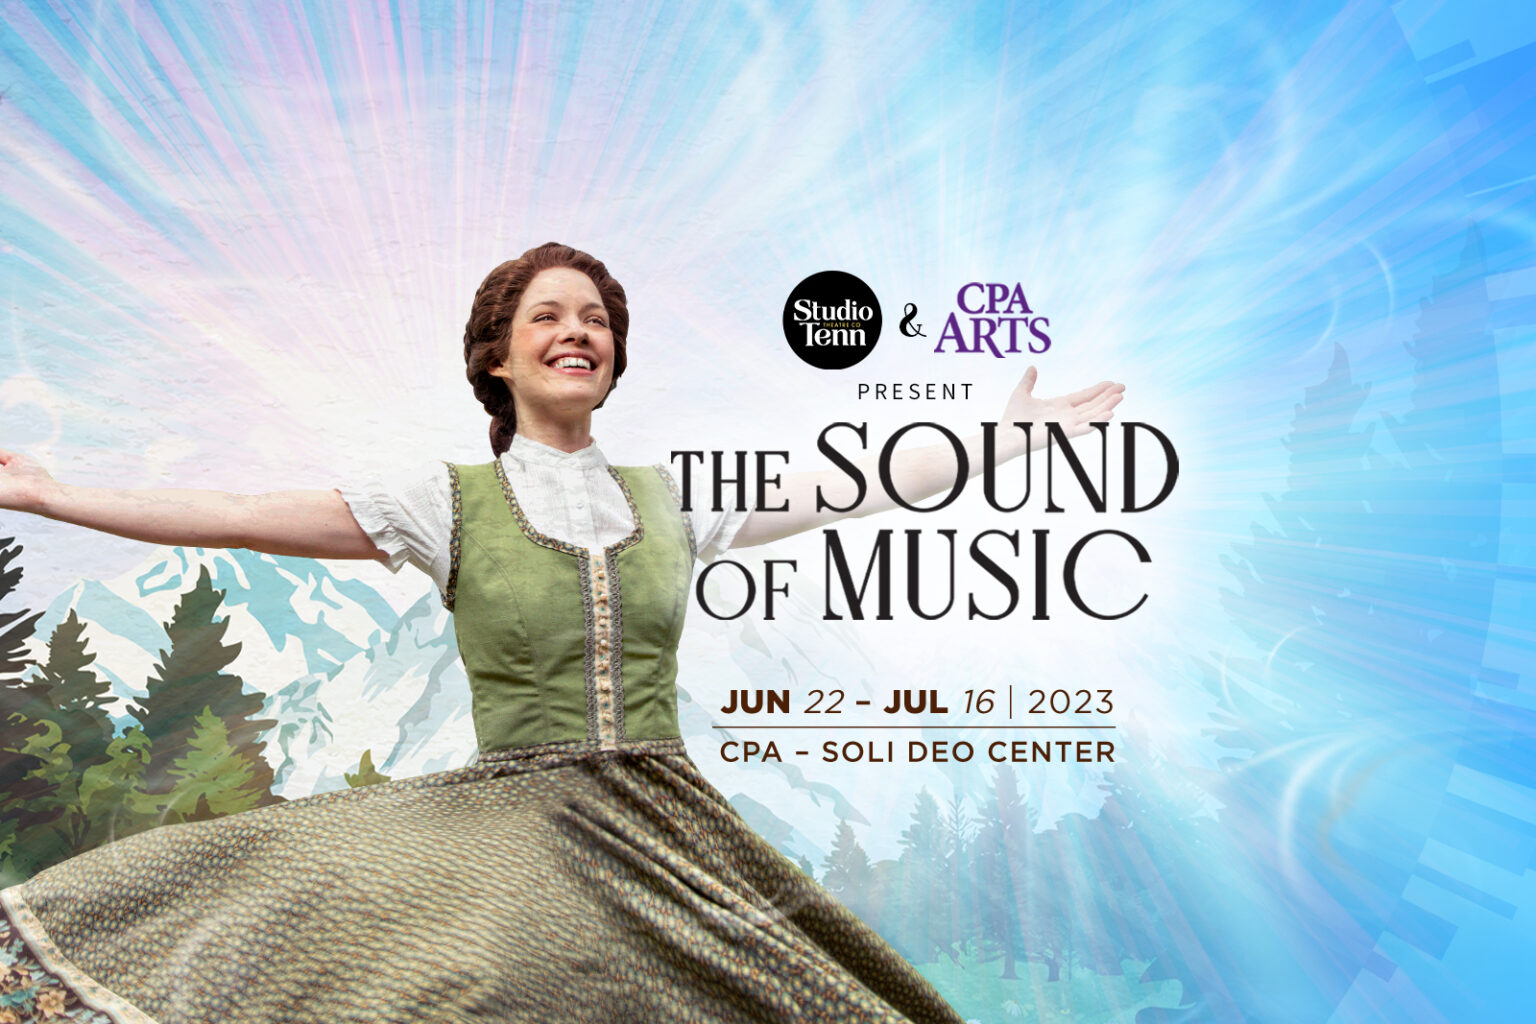 Rapid Fire 20Q with cast of Studio Tenn & CPA Arts’ ‘The Sound of Music